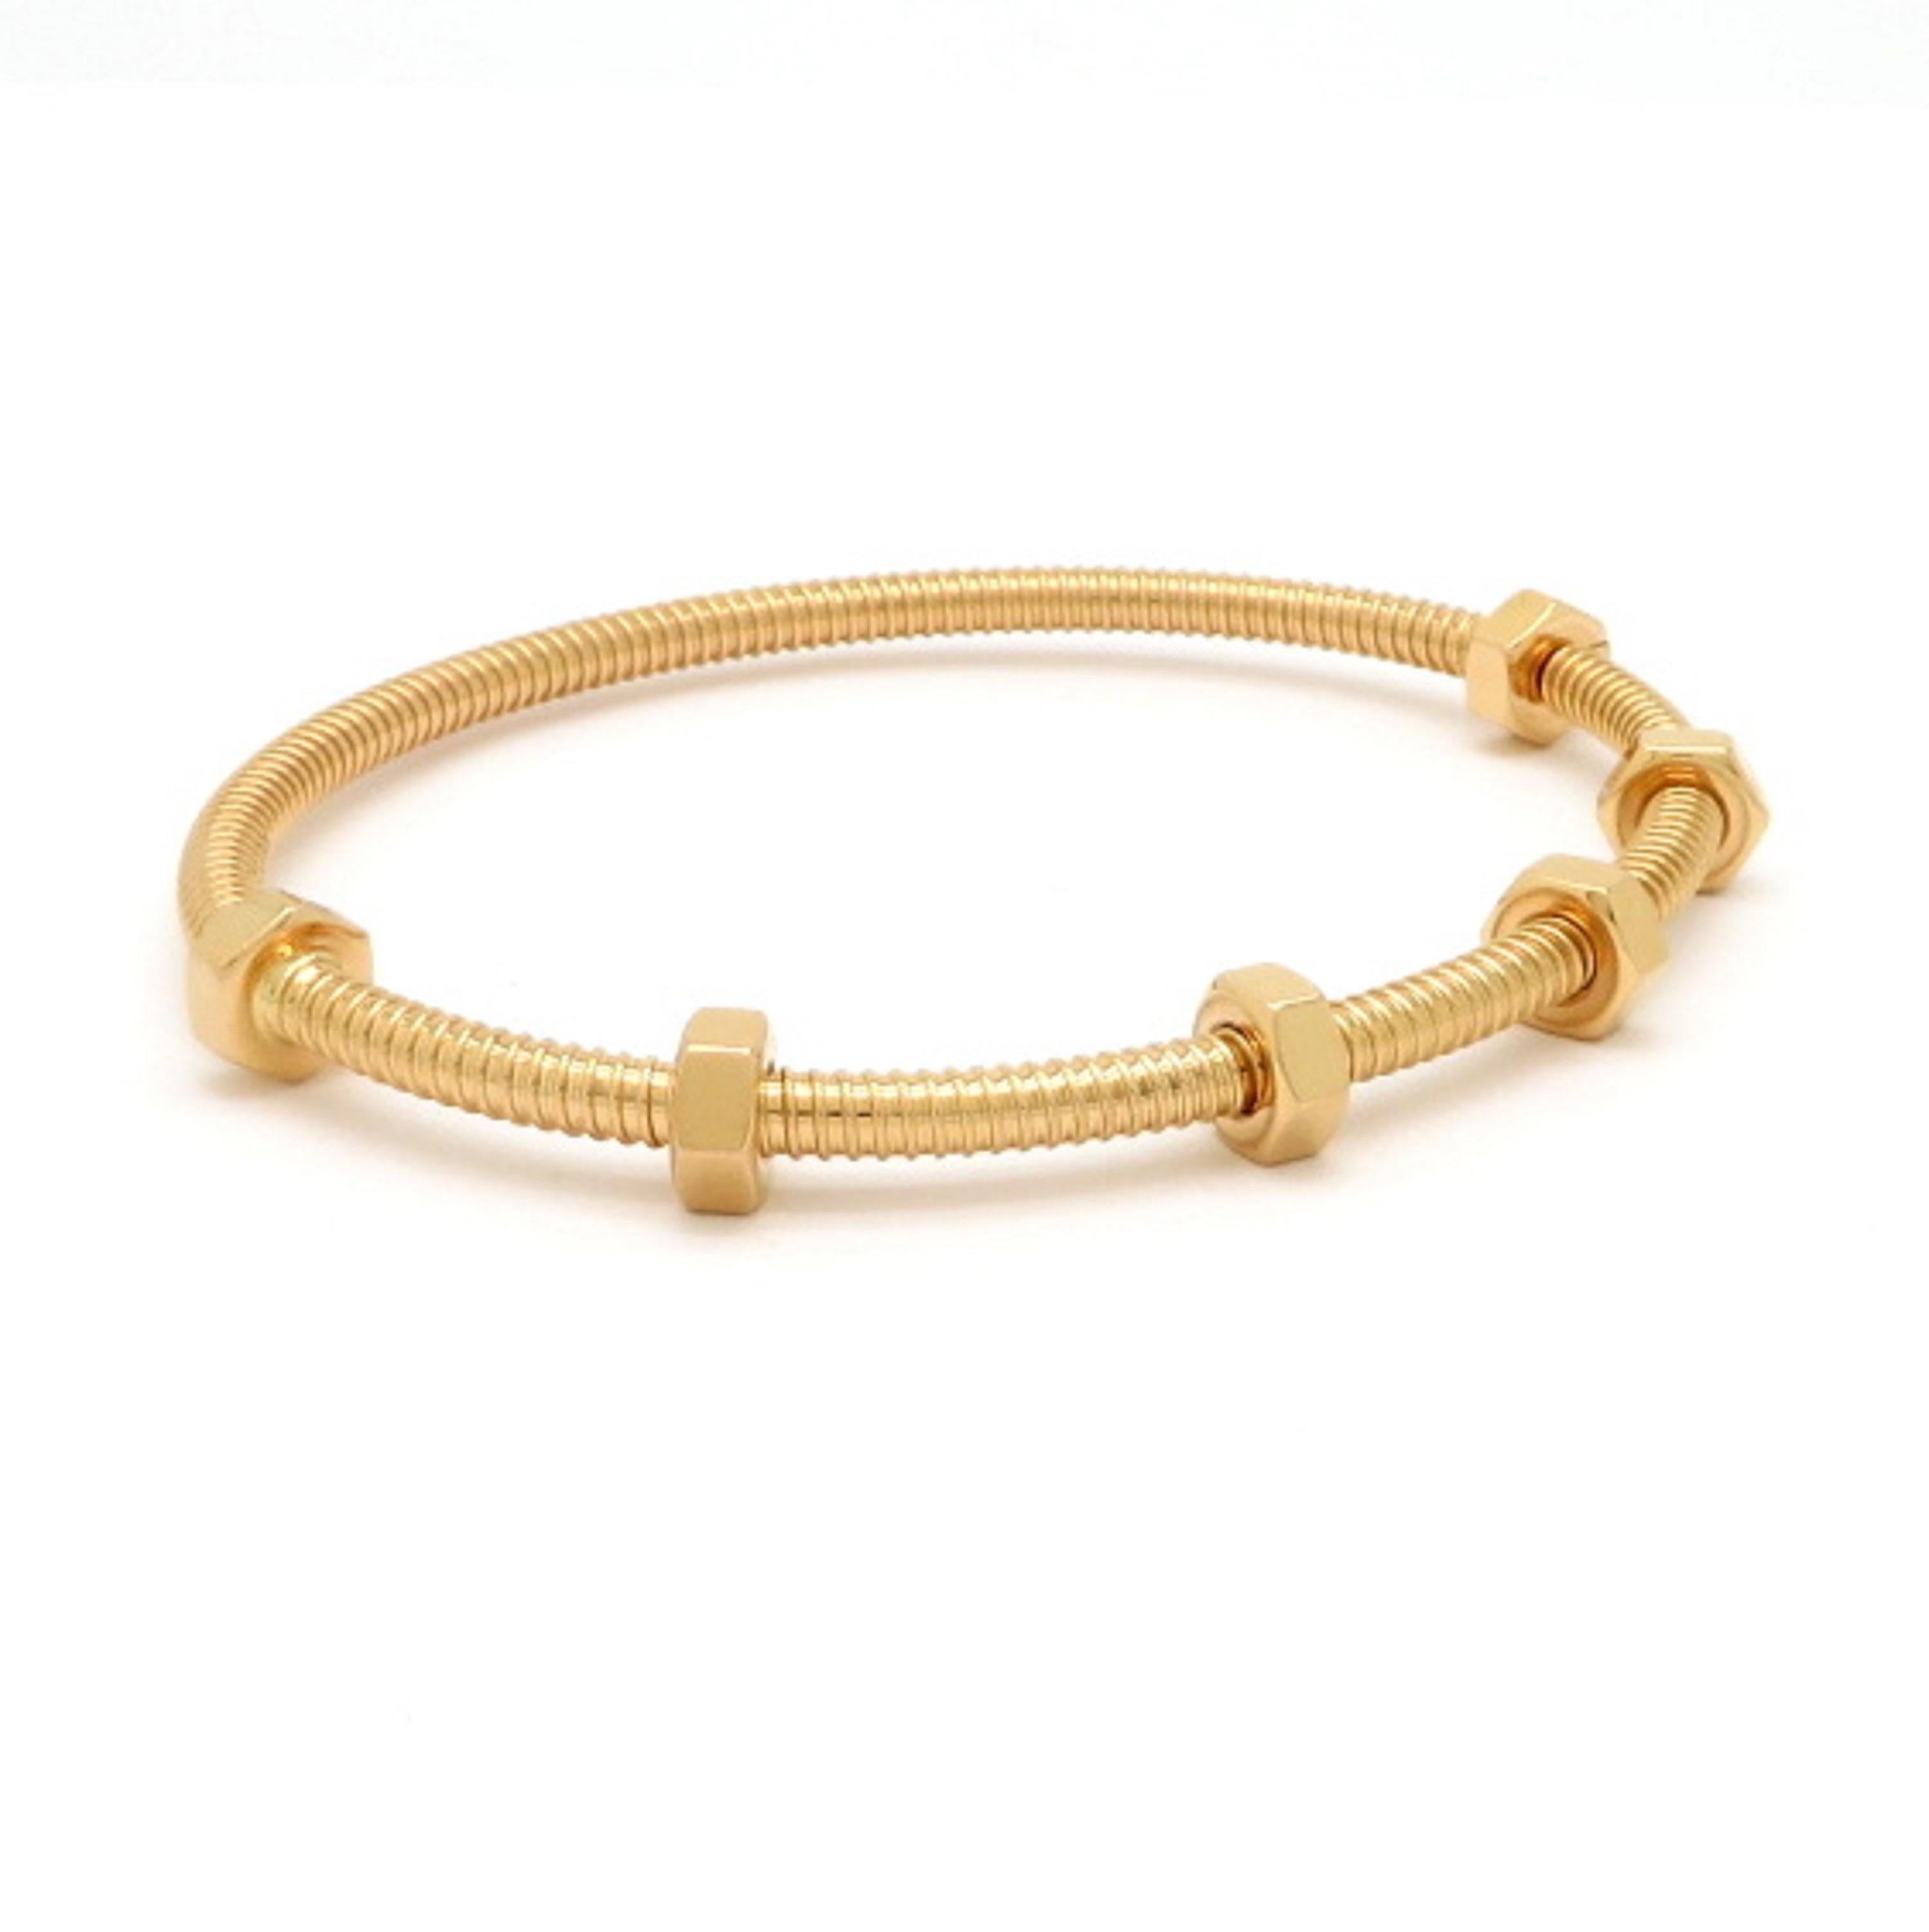 Designer Cartier 18K yellow gold Ecrou de Gold bangle bracelet. The inner diameter measures 50 x 63 mm. It includes the original box and papers. Size 18. Serial #Fif772. The total net weight is approximately 29.50 g. Authenticity 100% Guaranteed. 